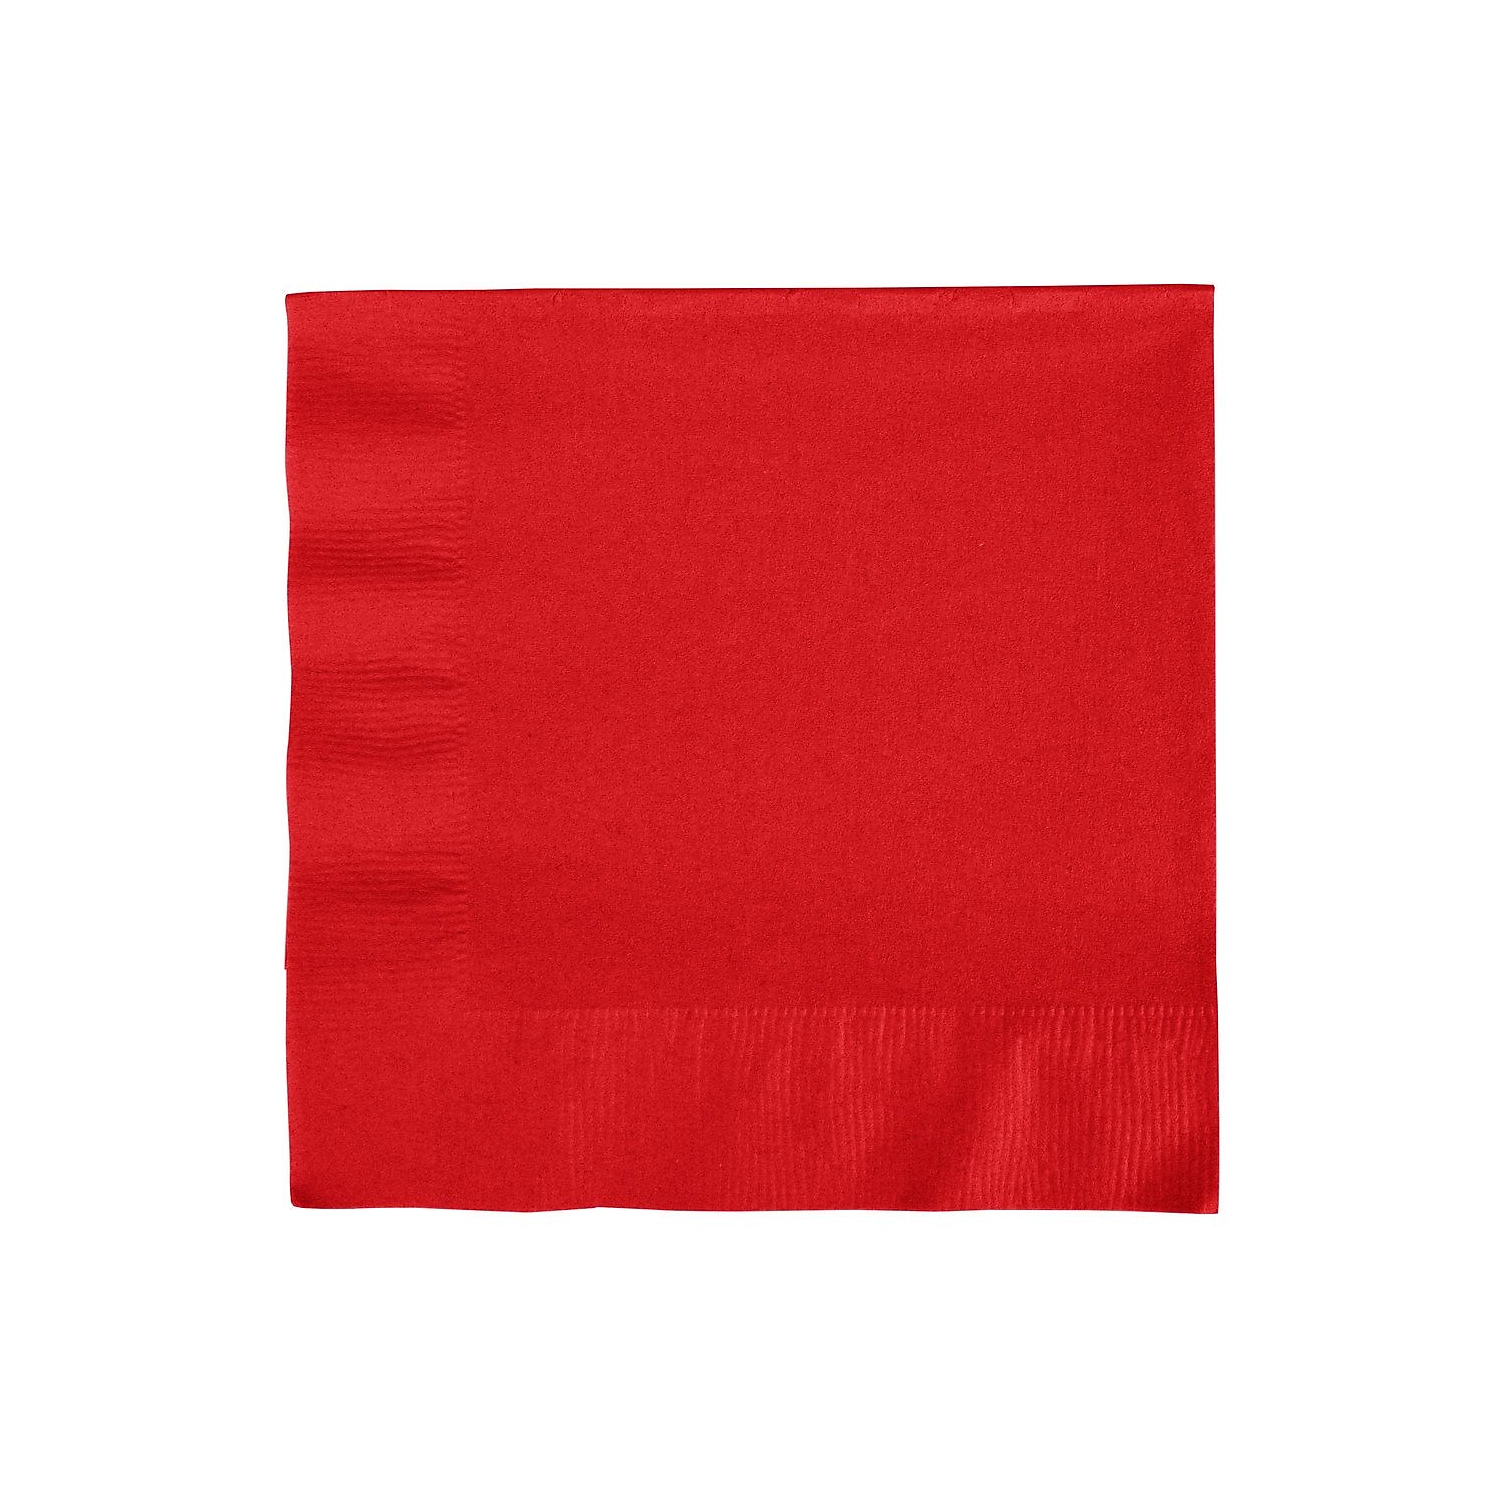 Creative Converting Classic Red 2-Ply Luncheon Napkins 50/Pack 661031B - image 1 of 2